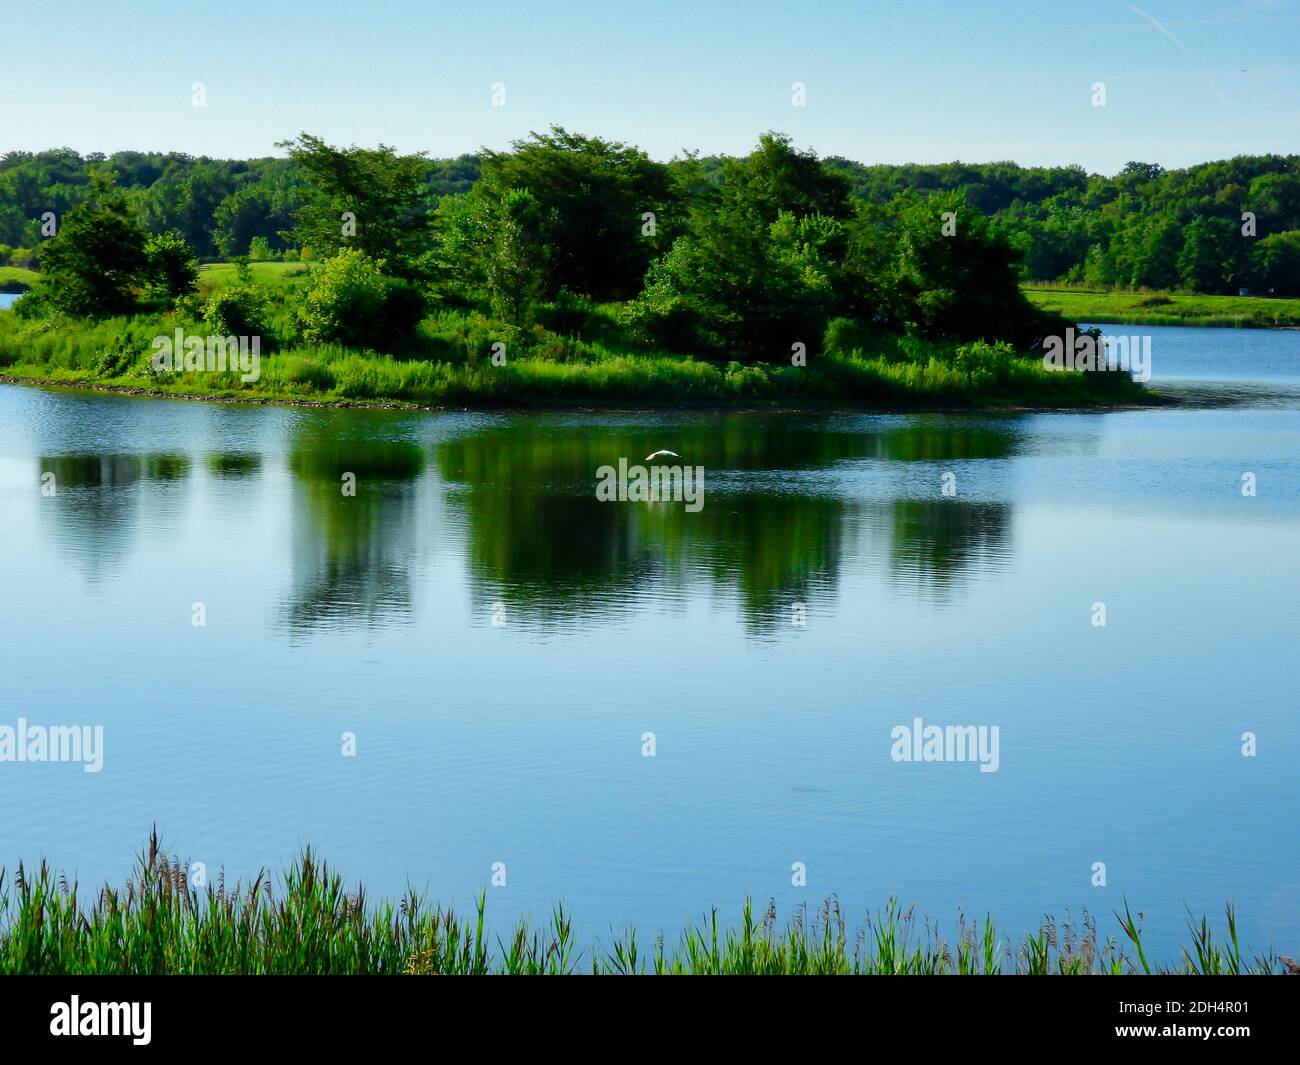 A Great Egret Bird Flys Over the Lake Toward the Island with Green Trees Reflected in the Water and Bright Blue Sky on a Beautiful Summer Day Stock Photo